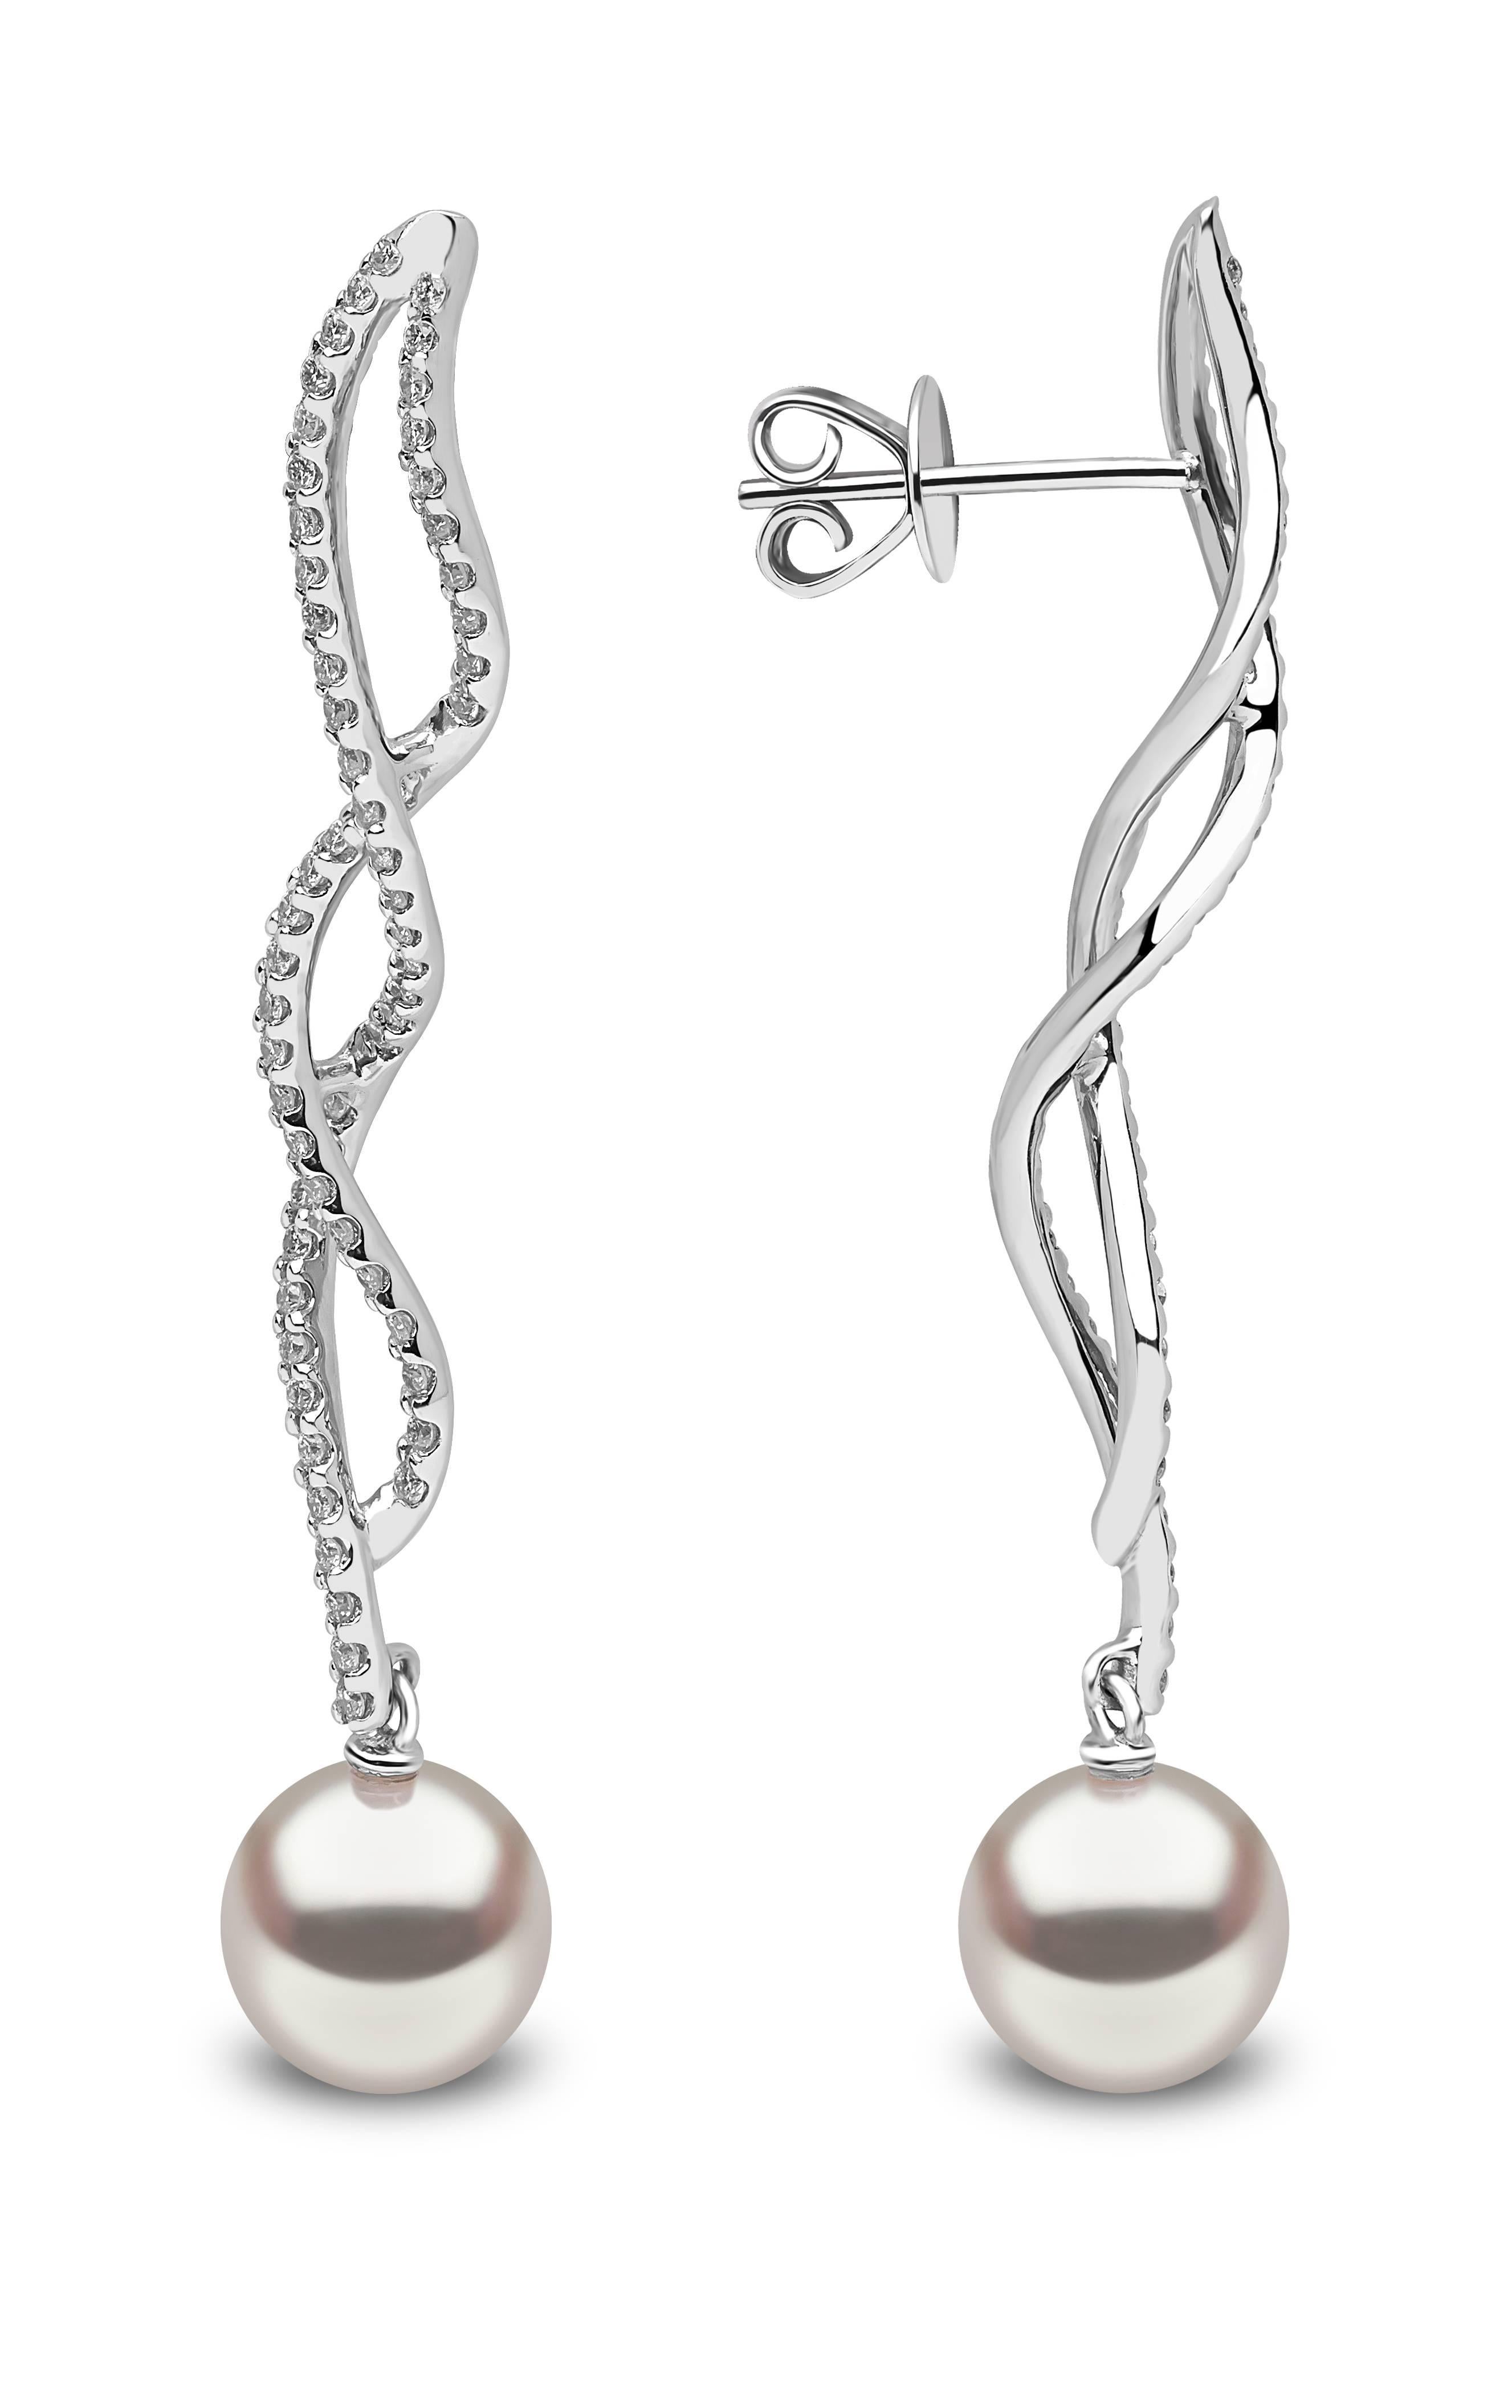 Sparkling statement earrings from Yoko London which perfectly pair pops of elegant white diamond with an elegant 8mm Cultured pearl set in 18k white gold. 

- 18k White Gold
- 120 Diamonds 0.55cts
- 8mm Cultured Pearl